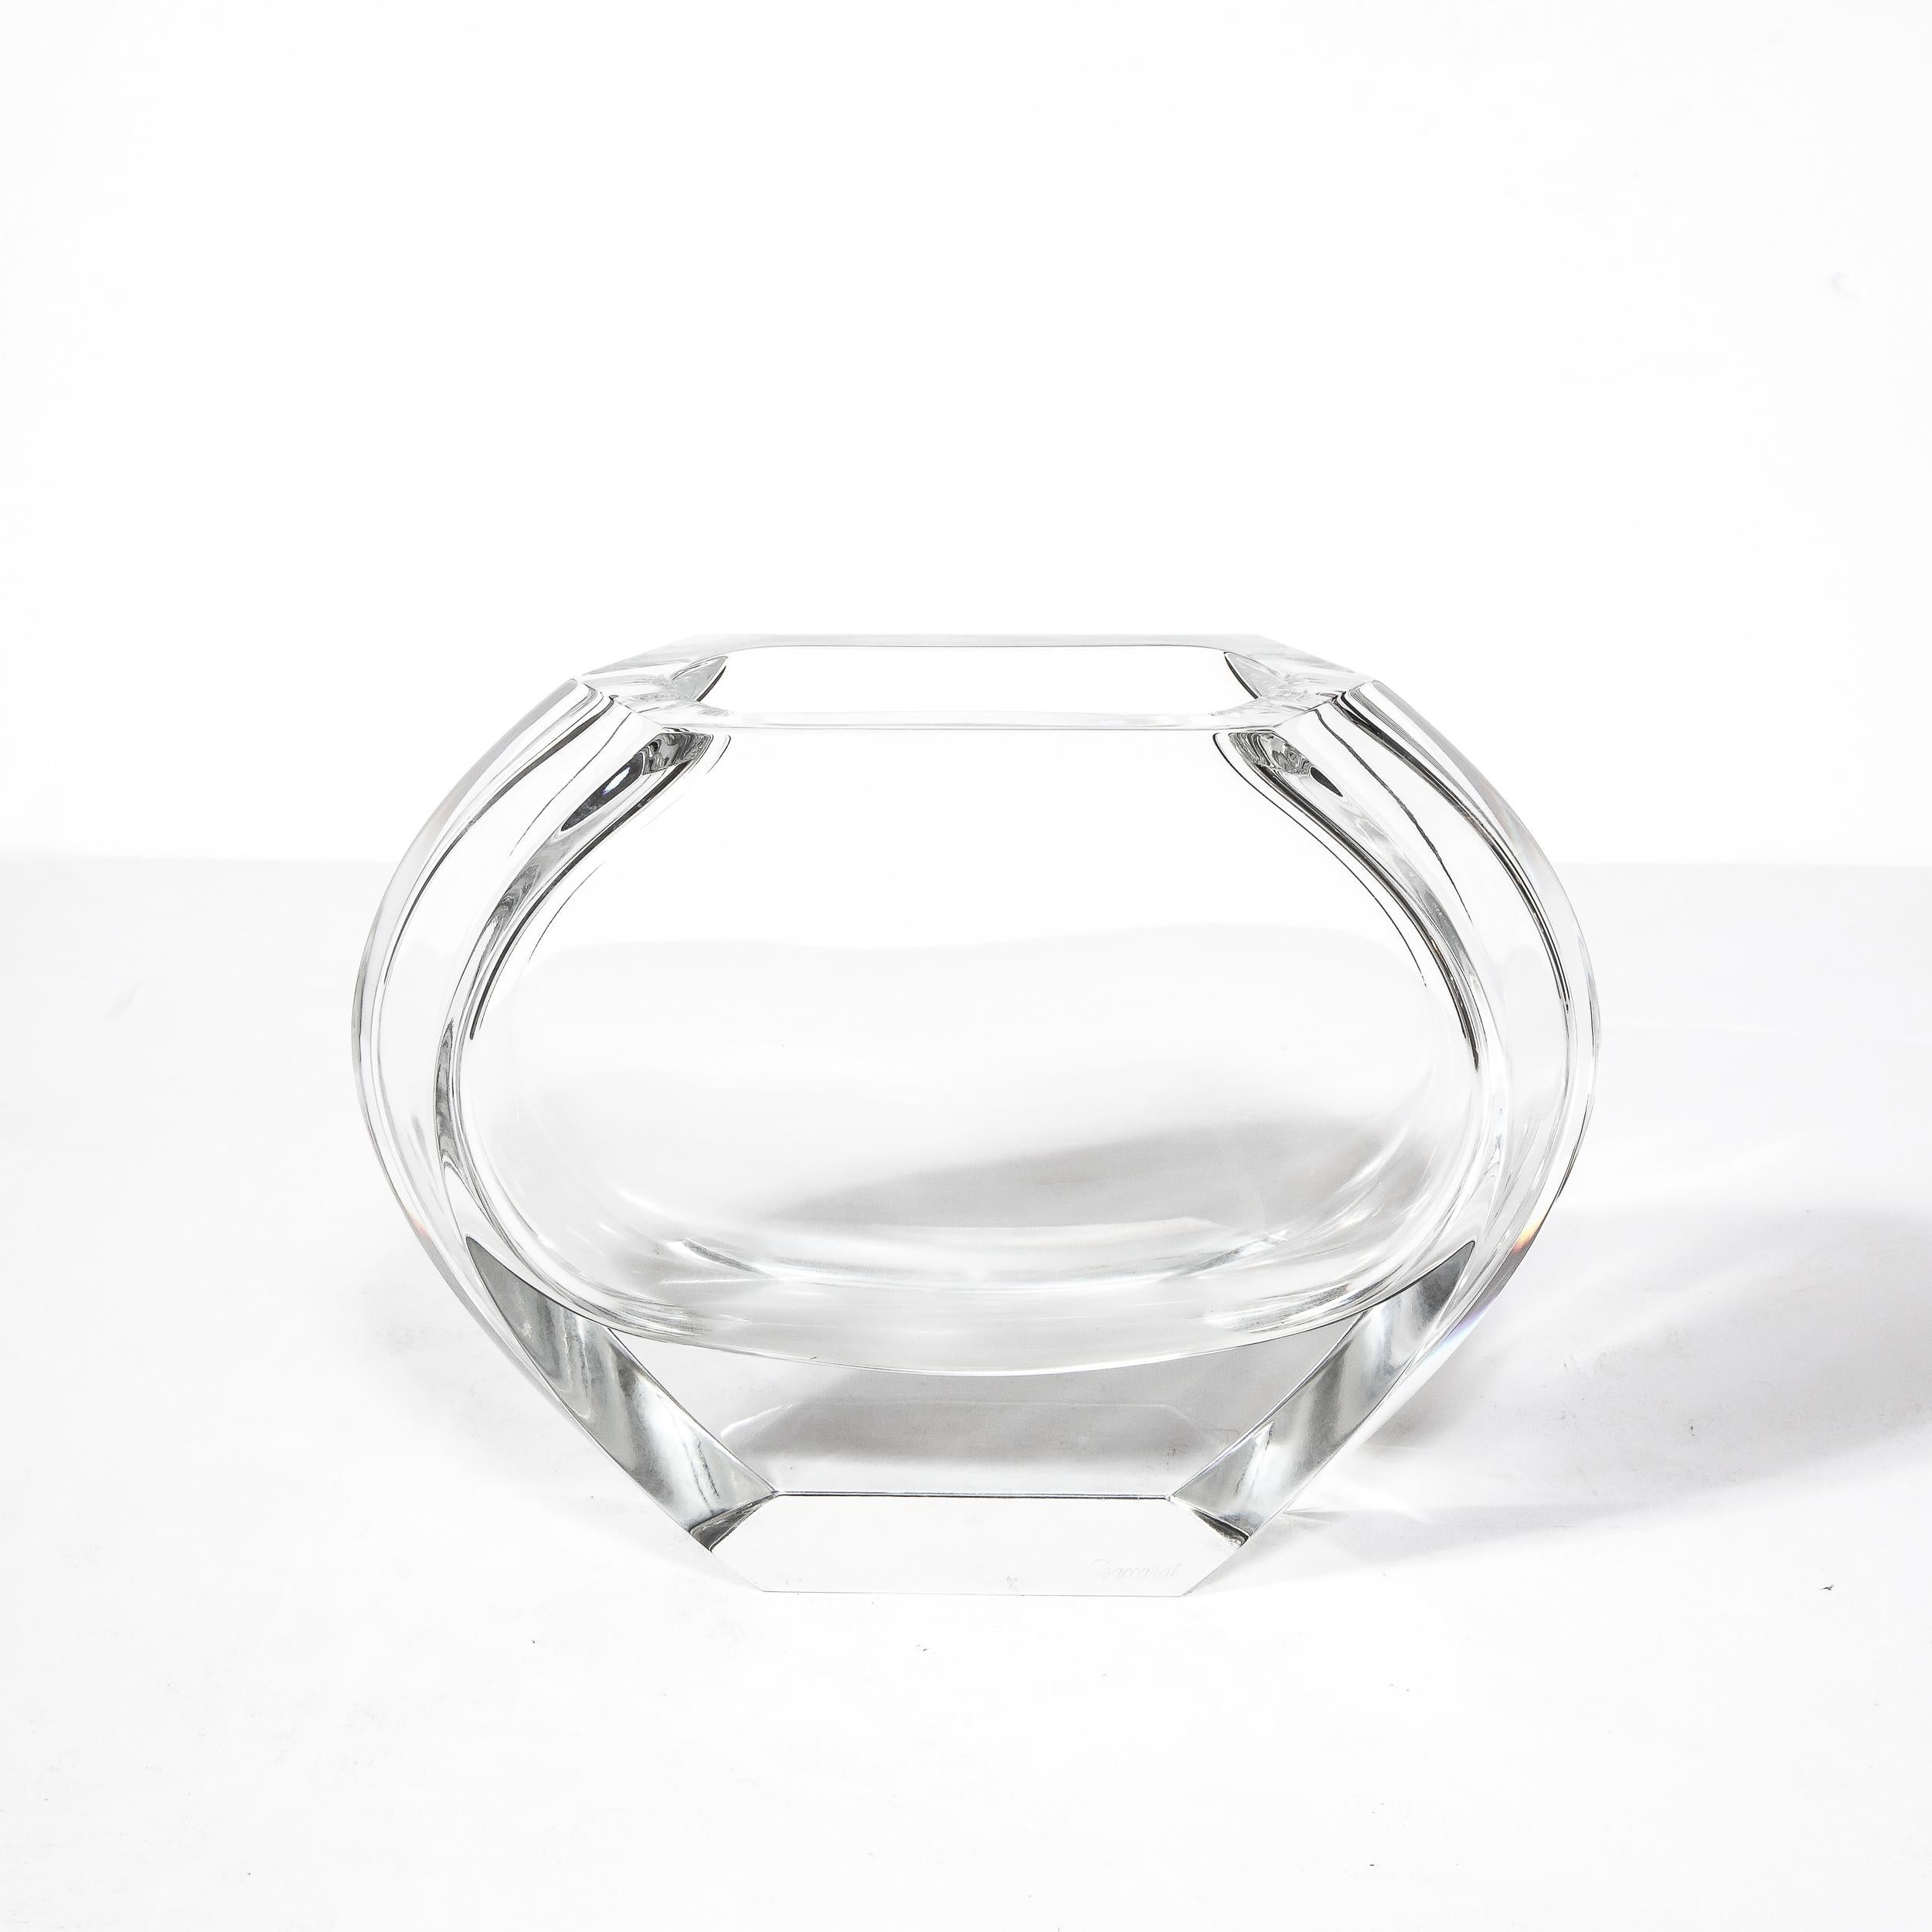 Mid-20th Century Mid-Century Modernist Crystal Hexagonal Base & Flat Sides Vase signed Baccarat For Sale